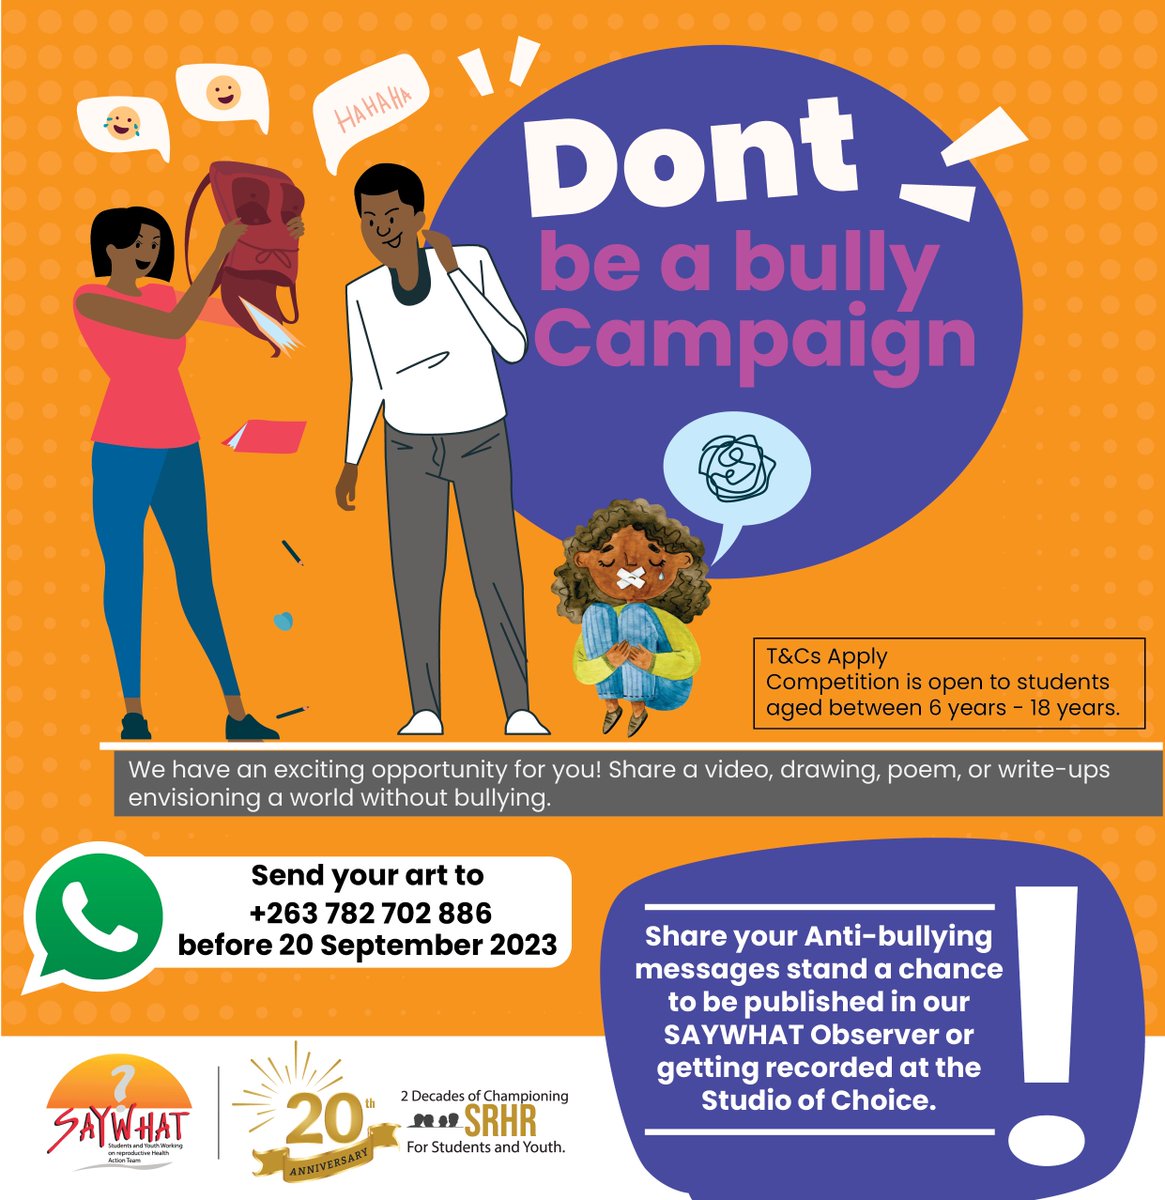 We are pleased to announce that our Dont Be a Bully Campaign has been extended. We invite you to share this information with your friends & family, as they may benefit from it. As the African proverb states, if you want to go fast, go alone; if you want to go far, go together.